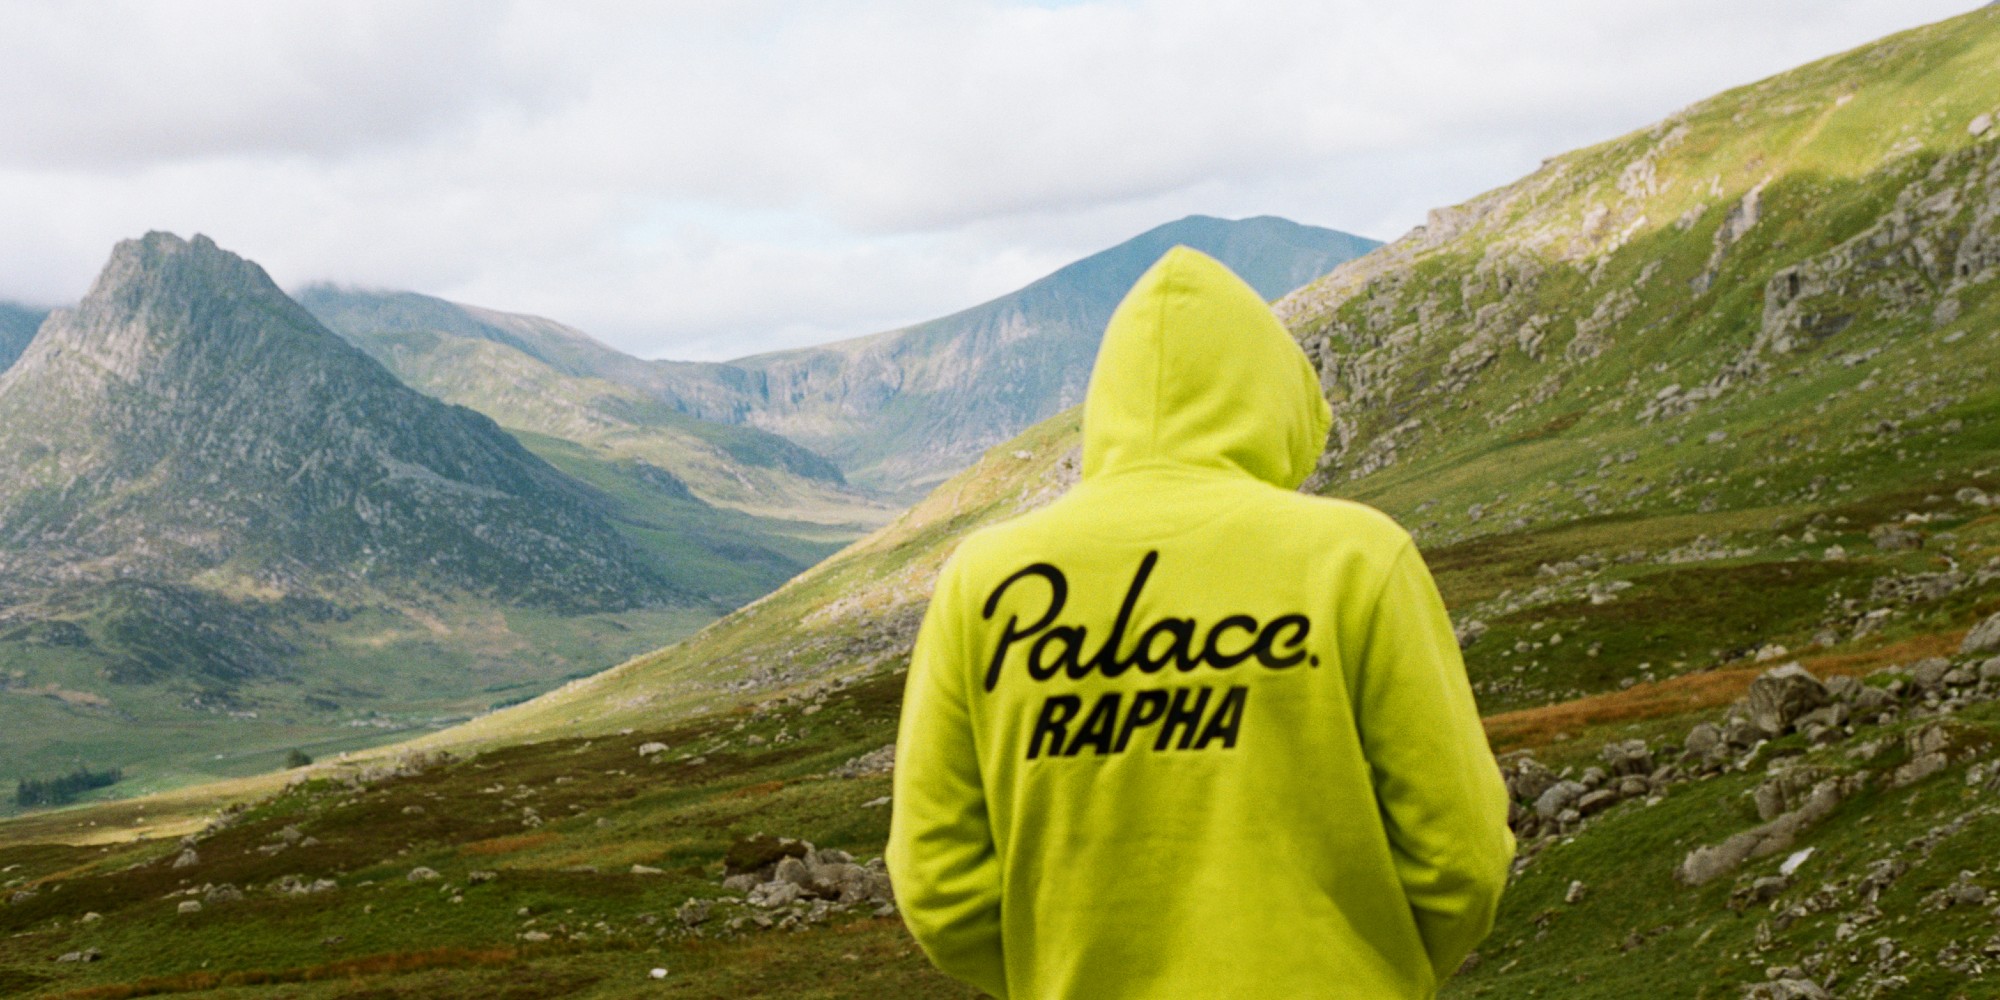 Rapha and Palace Skateboards partner on collection to celebrate